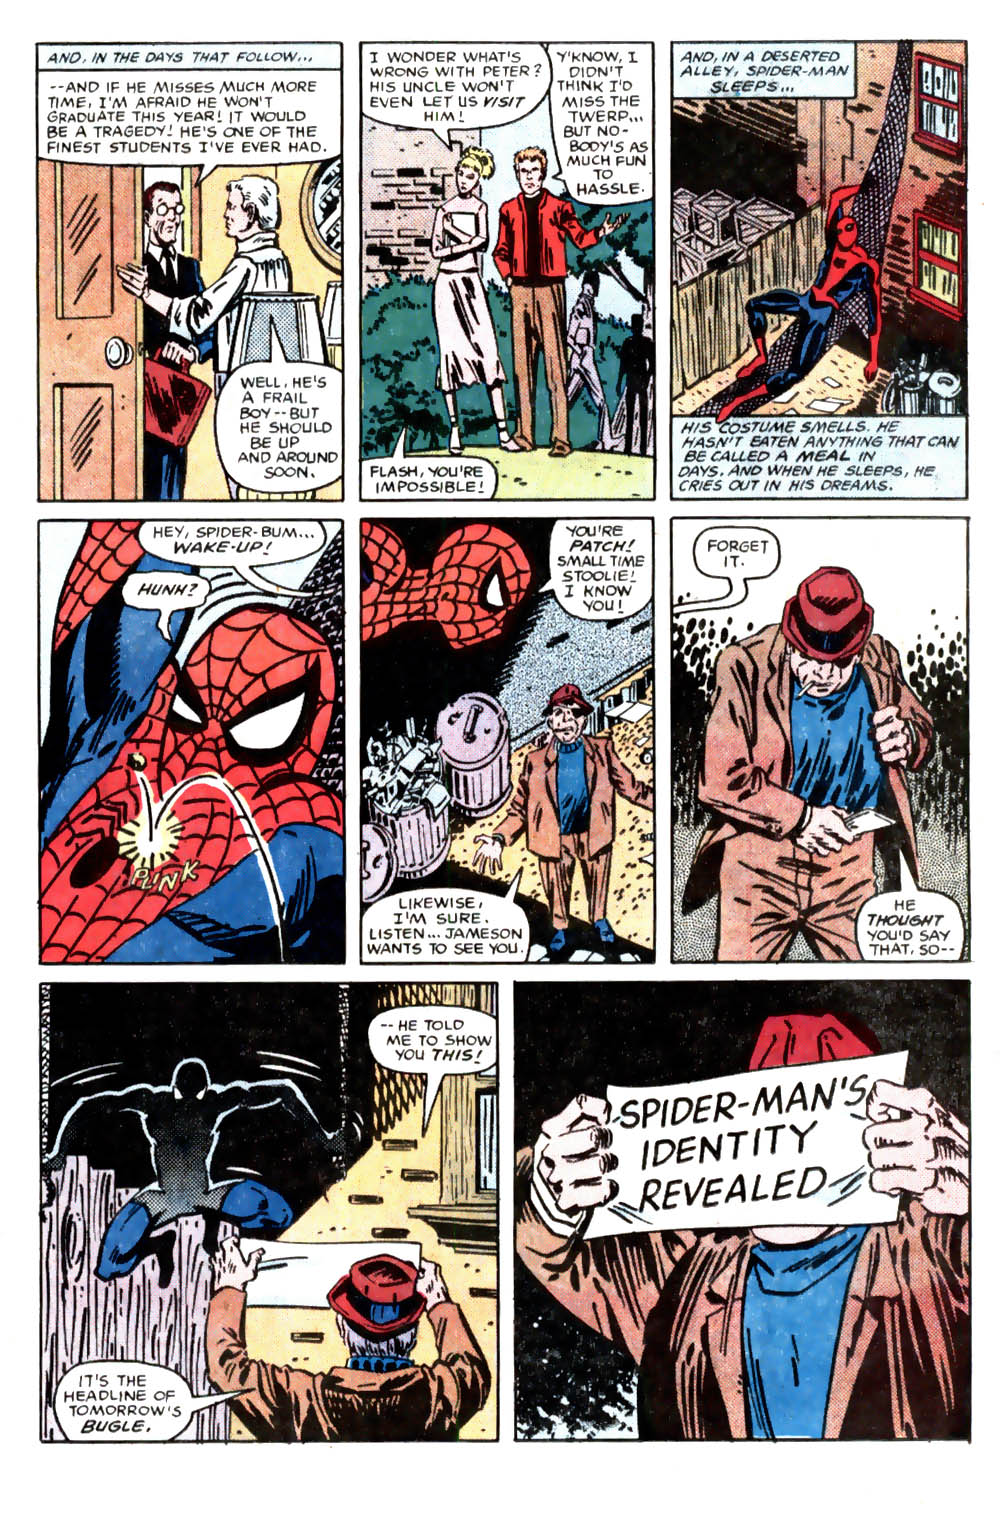 What If? (1977) issue 46 - Spiderman's uncle ben had lived - Page 30